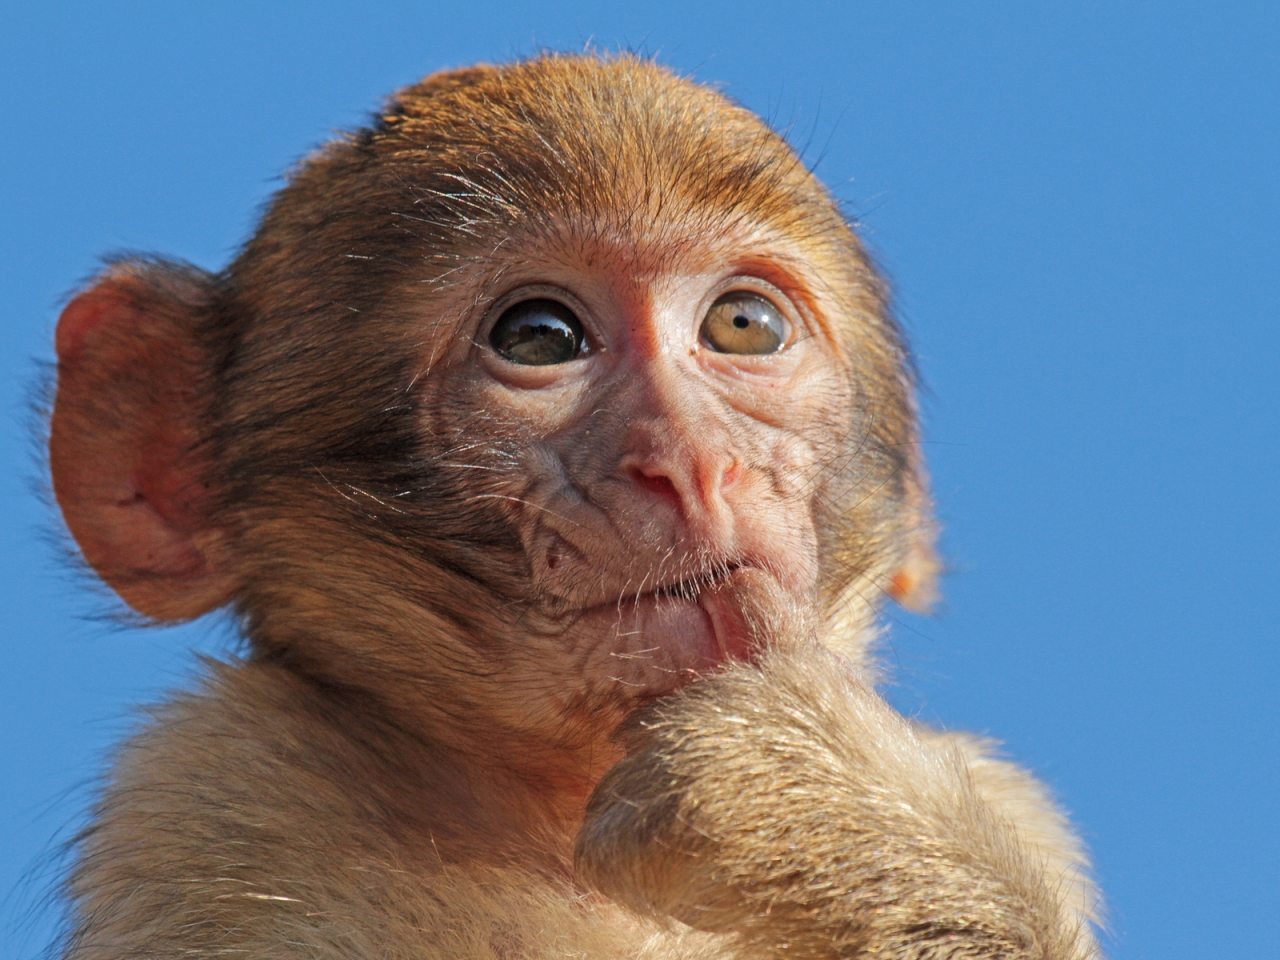 Macaque Monkey for 1280 x 960 resolution